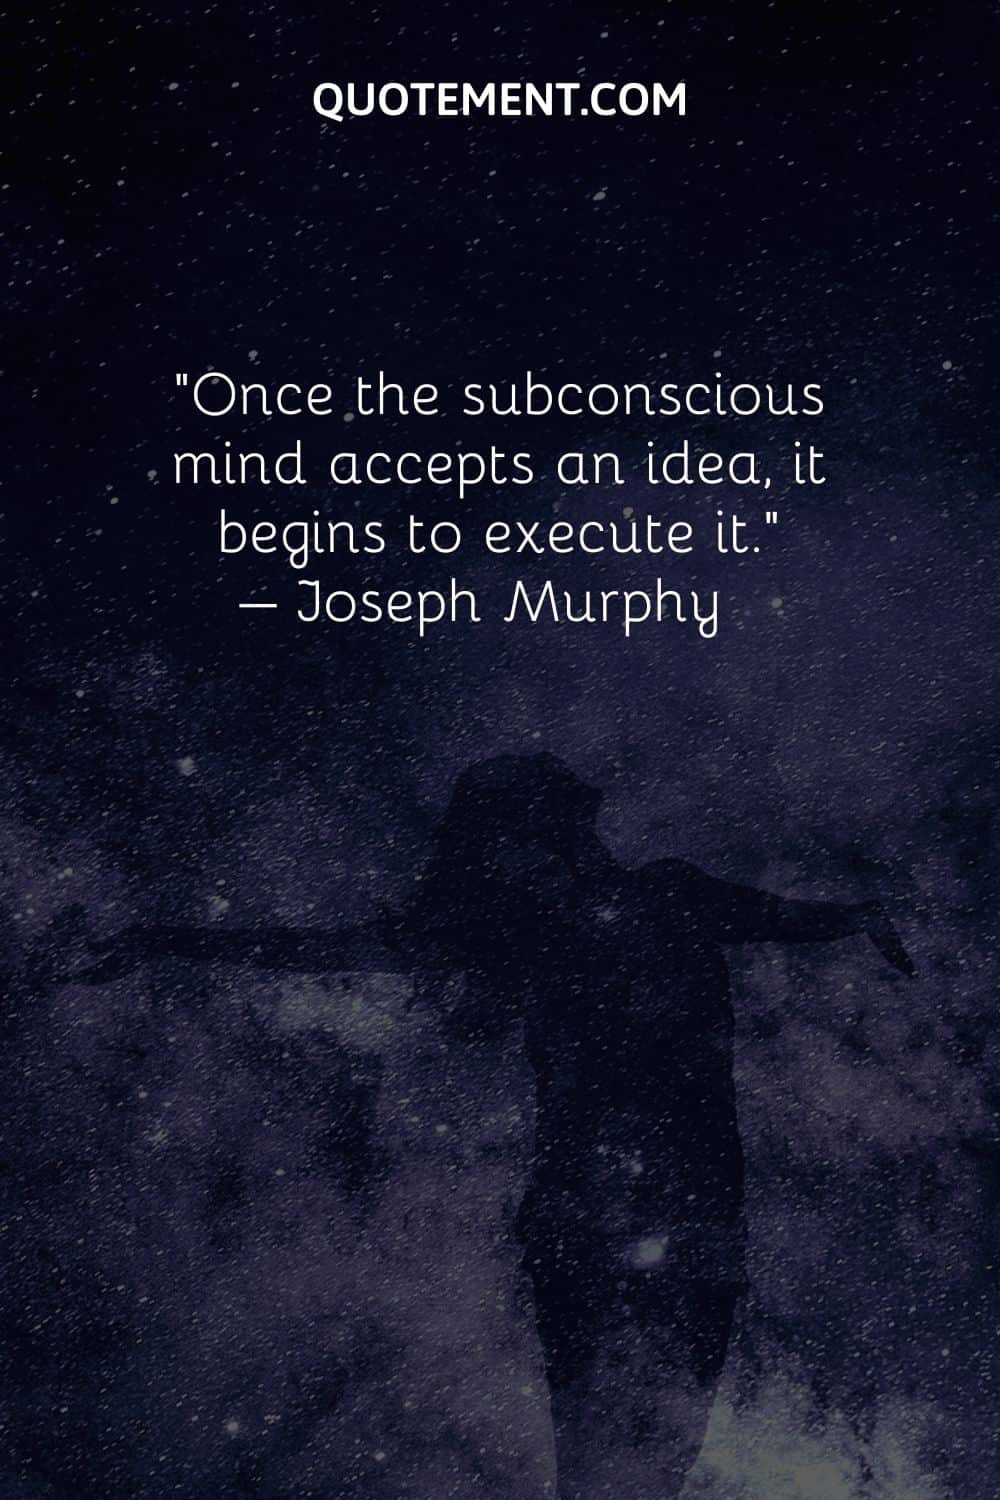 Once the subconscious mind accepts an idea, it begins to execute it